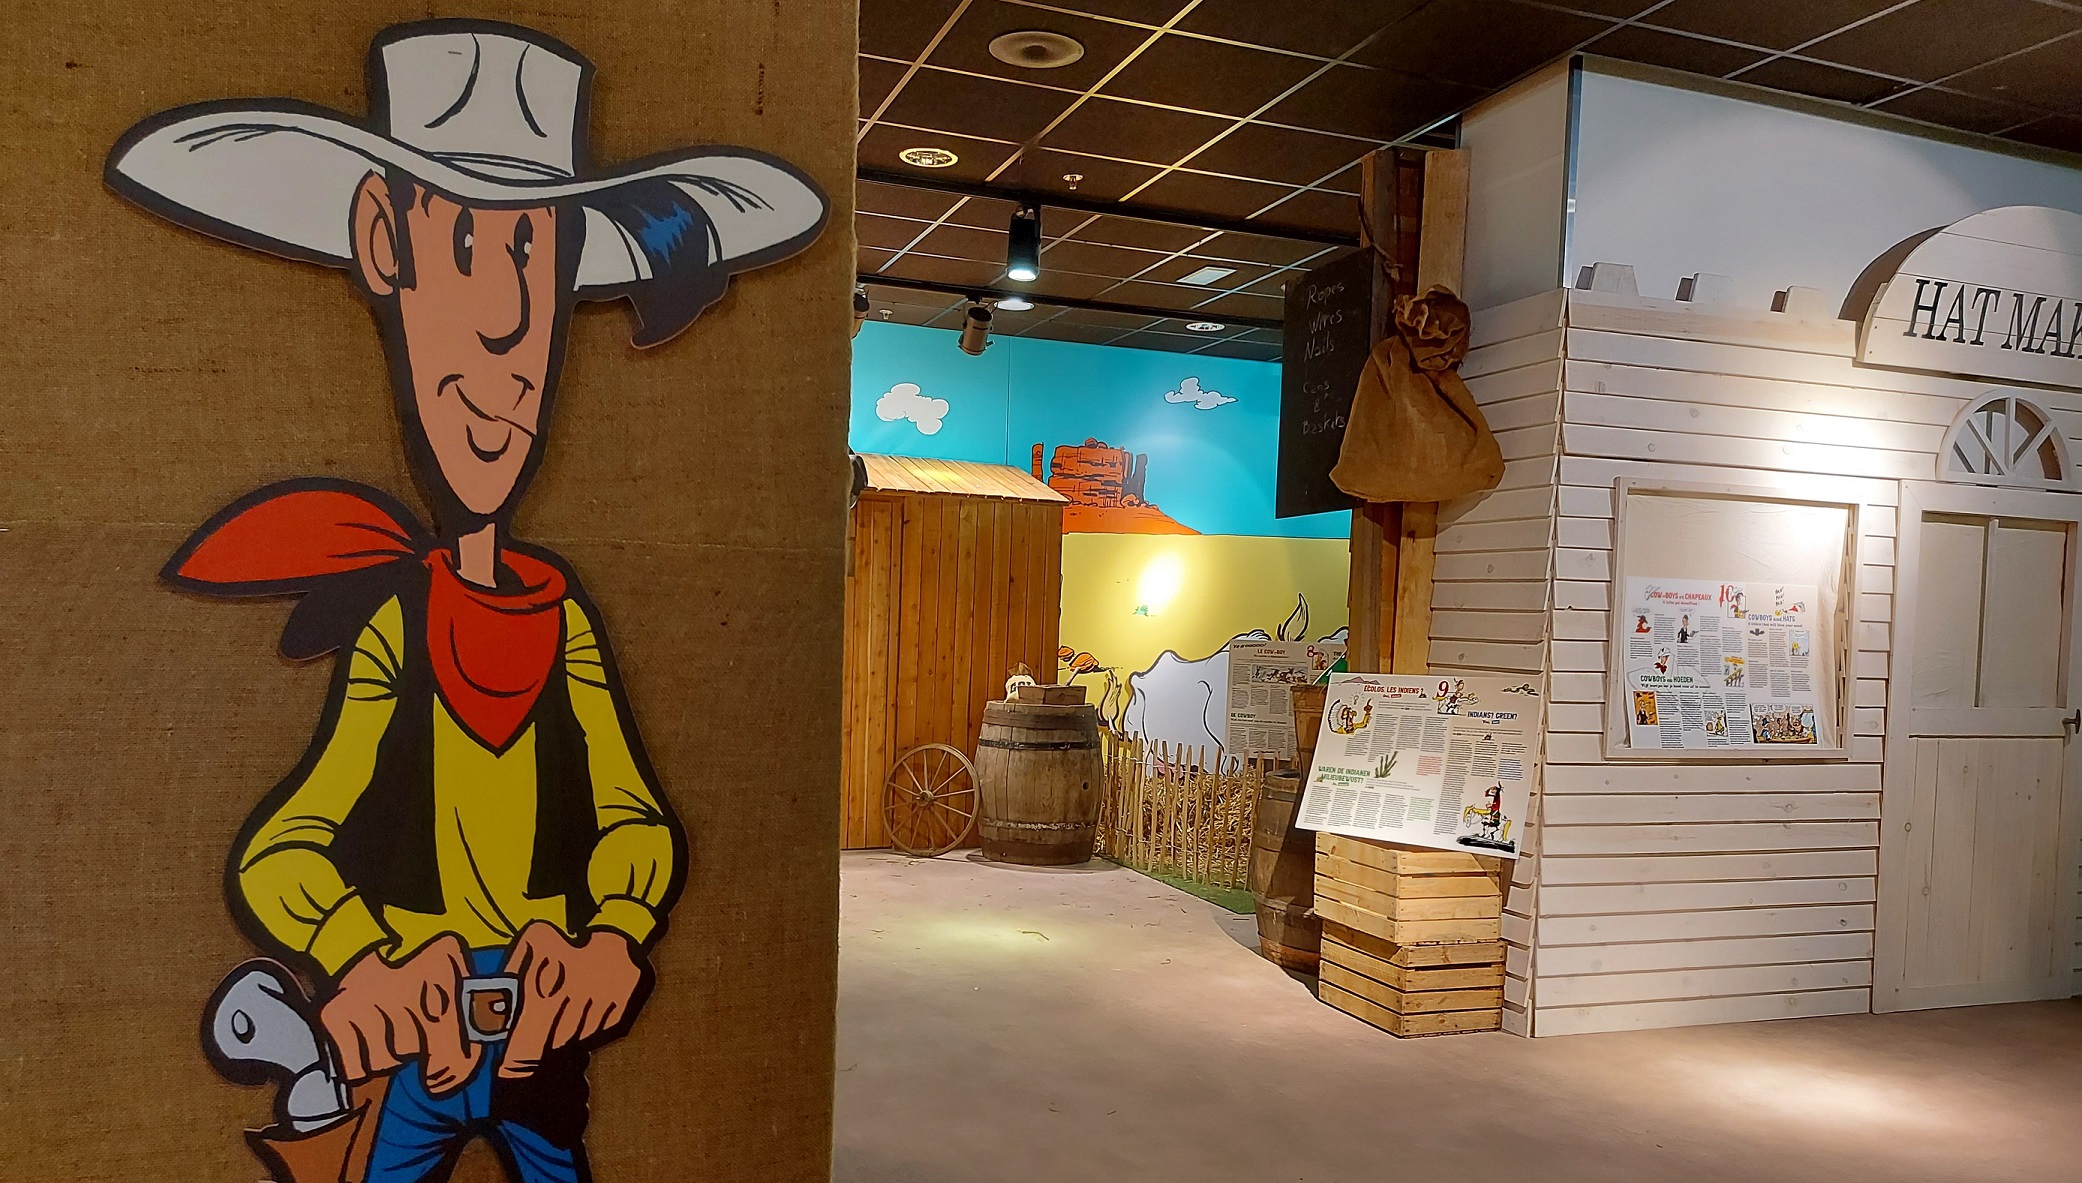 A scene from the Lucky Luke exhibition at Aspach shopping centre